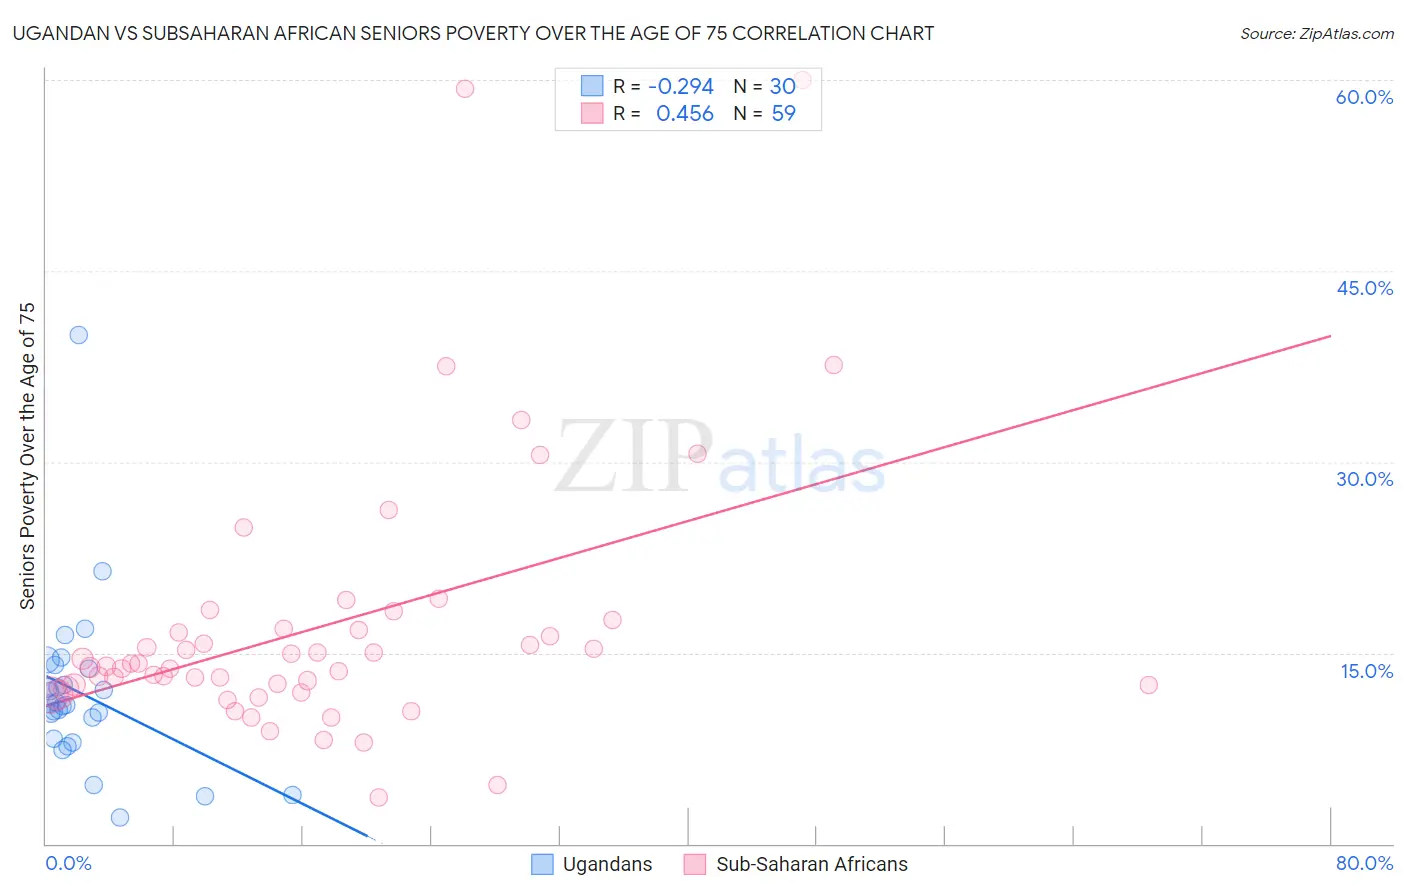 Ugandan vs Subsaharan African Seniors Poverty Over the Age of 75